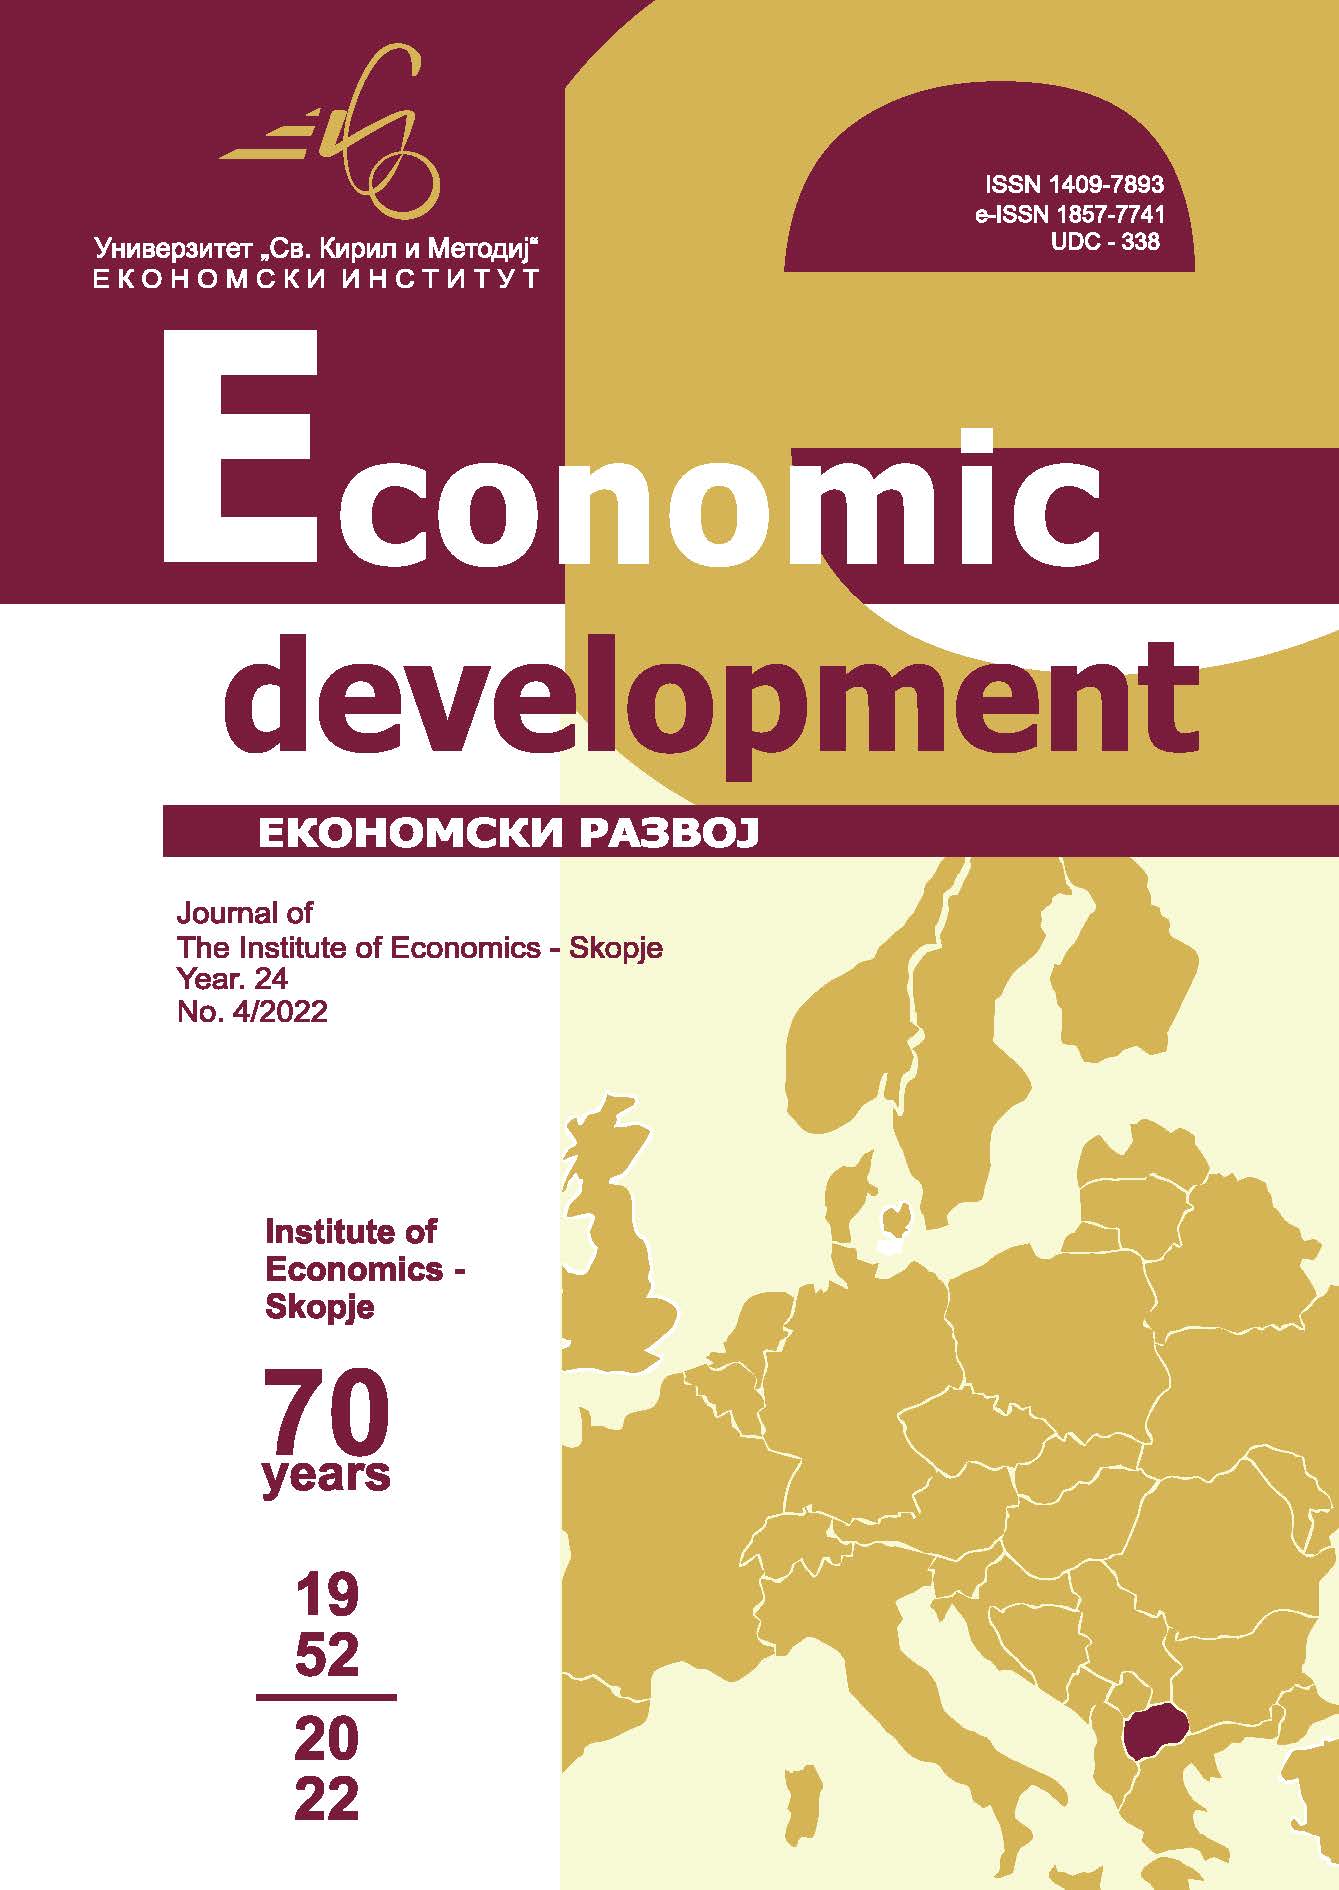 MACROECONOMIC PERFORMANCE OF WB COUNTRIES - EMPIRICAL INVESTIGATION Cover Image